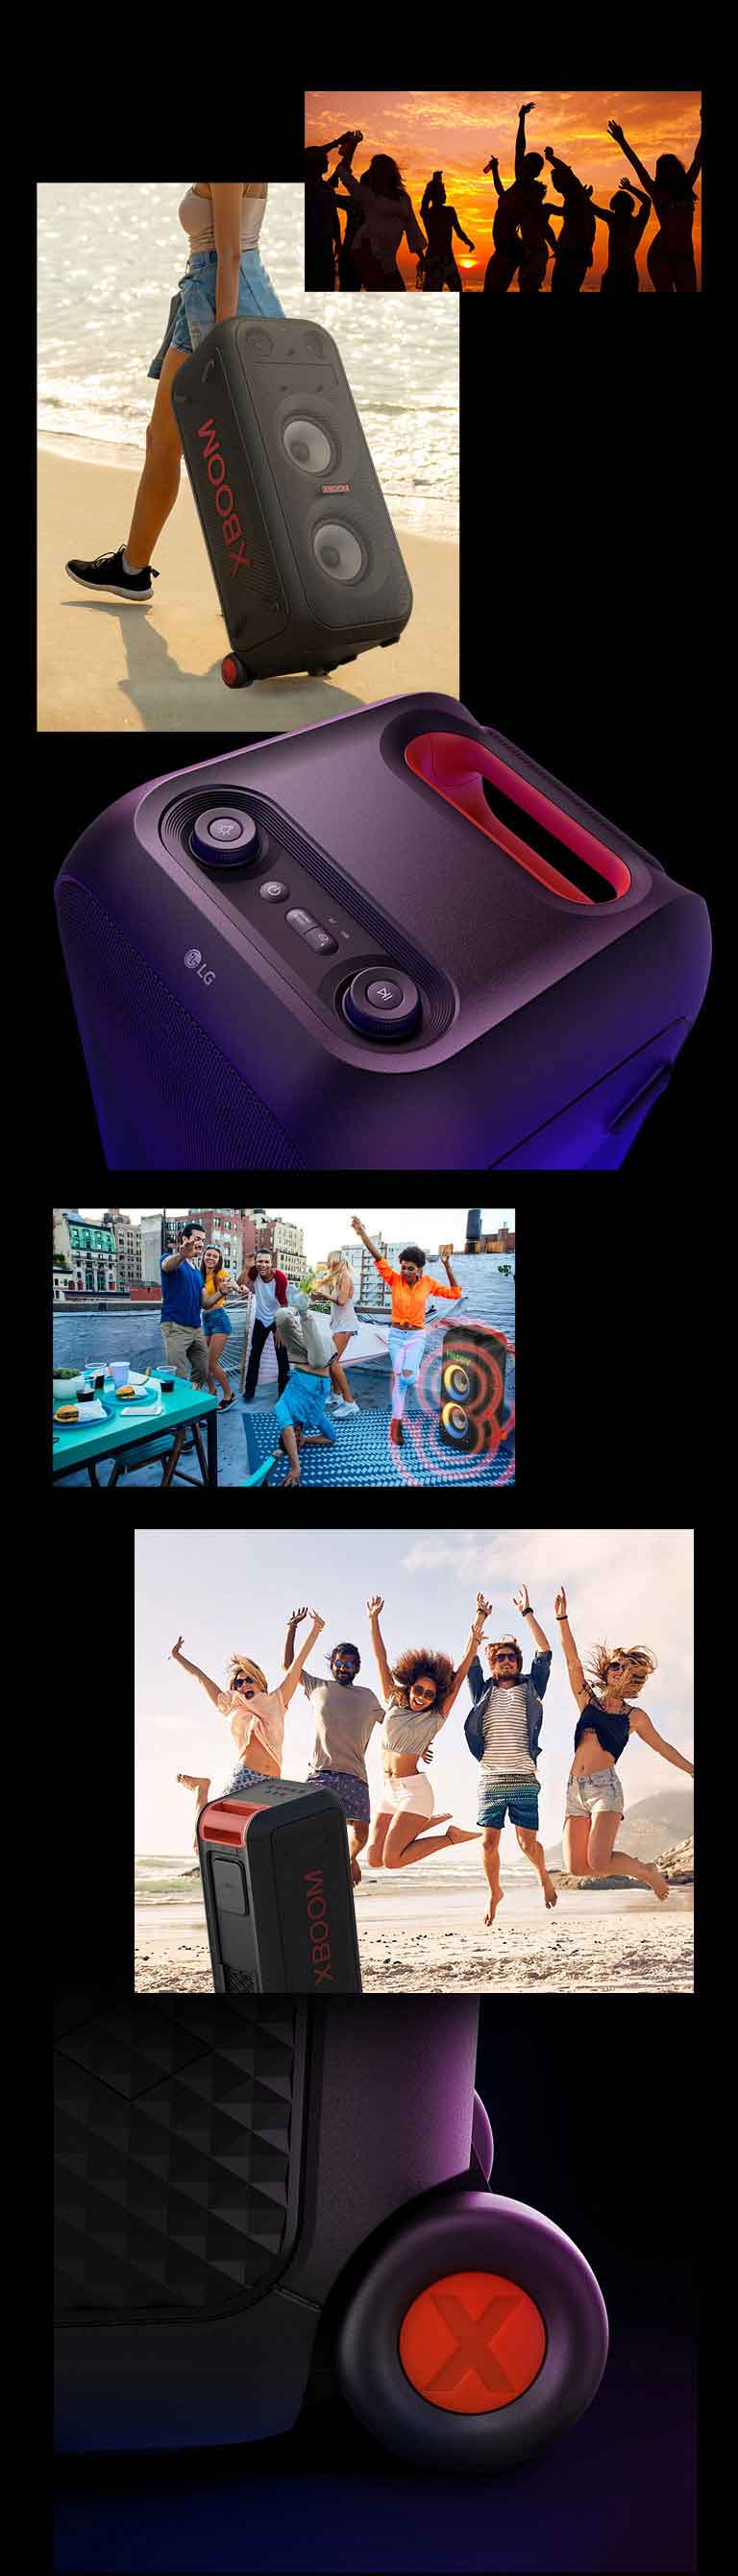 Illustrated images of LG XBOOM XL9T. From the top, shillouet of people, with the telescopic handle and wheels woman carrys the speaker easily. Top view of the speaker and telescopic handle. People are enjoying rooftop party, two LG XBOOM XL9T with sound graphics are placed behind. Back view of the speaker and people are juming on the beach, close-up of the wheel.